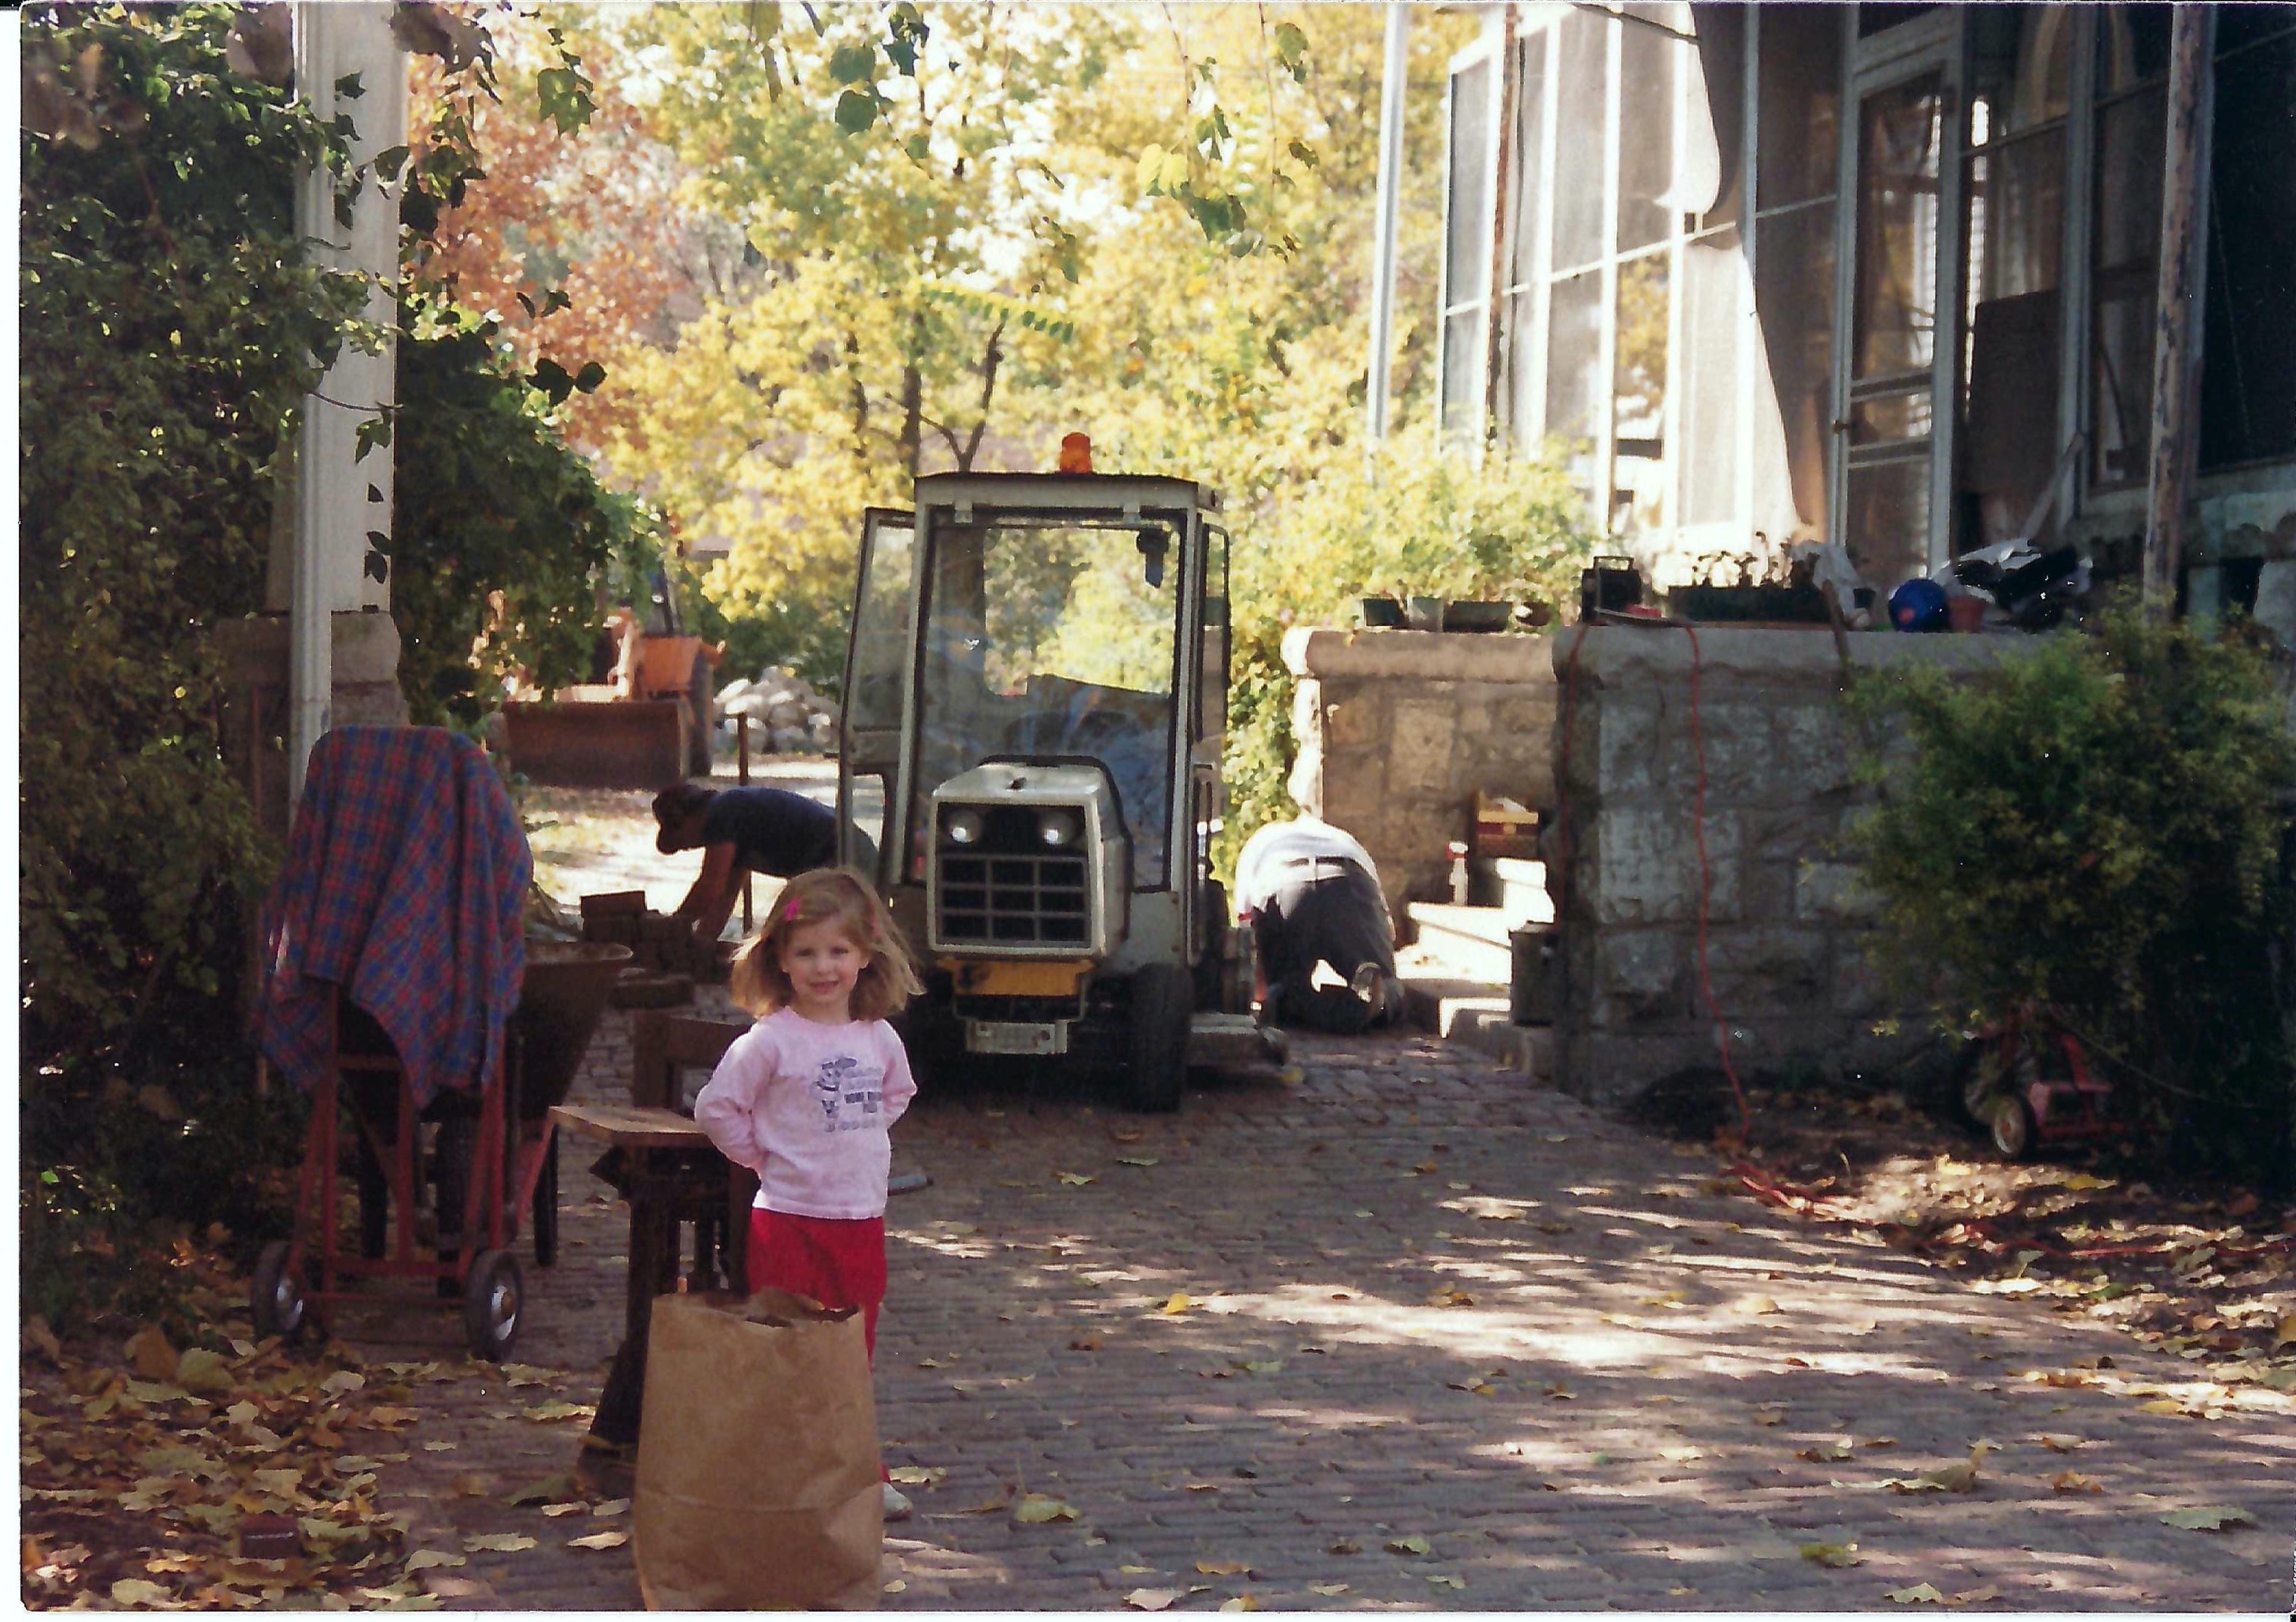 Three-year old girl posing for a photo in the foreground, while two men lay bricks in the background. The side of a house and two tractors are visible. 